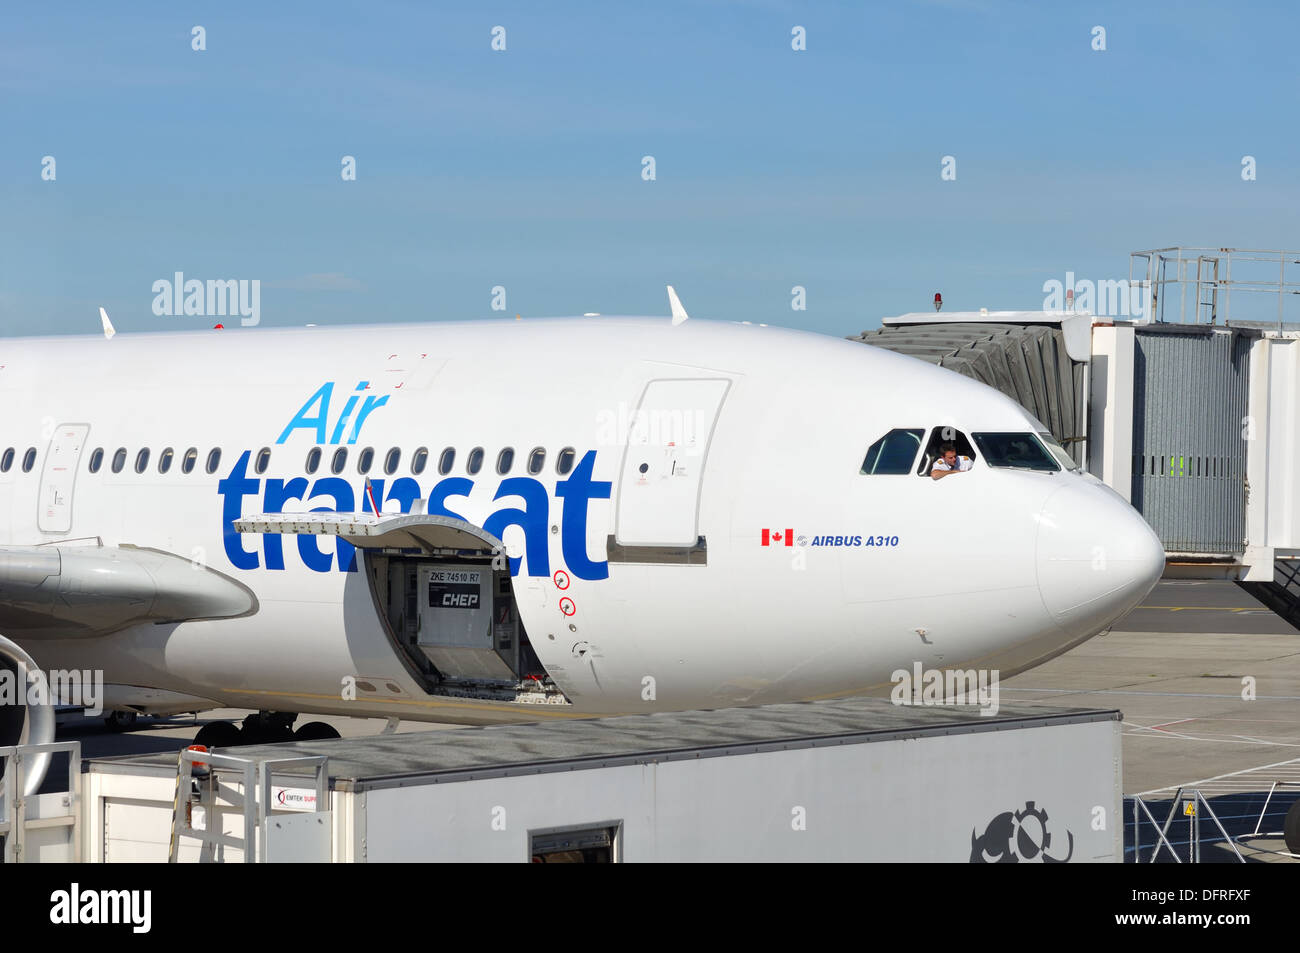 Air Transat airbus being loaded whilst pilot looks on leaning out from cockpit window. Stock Photo